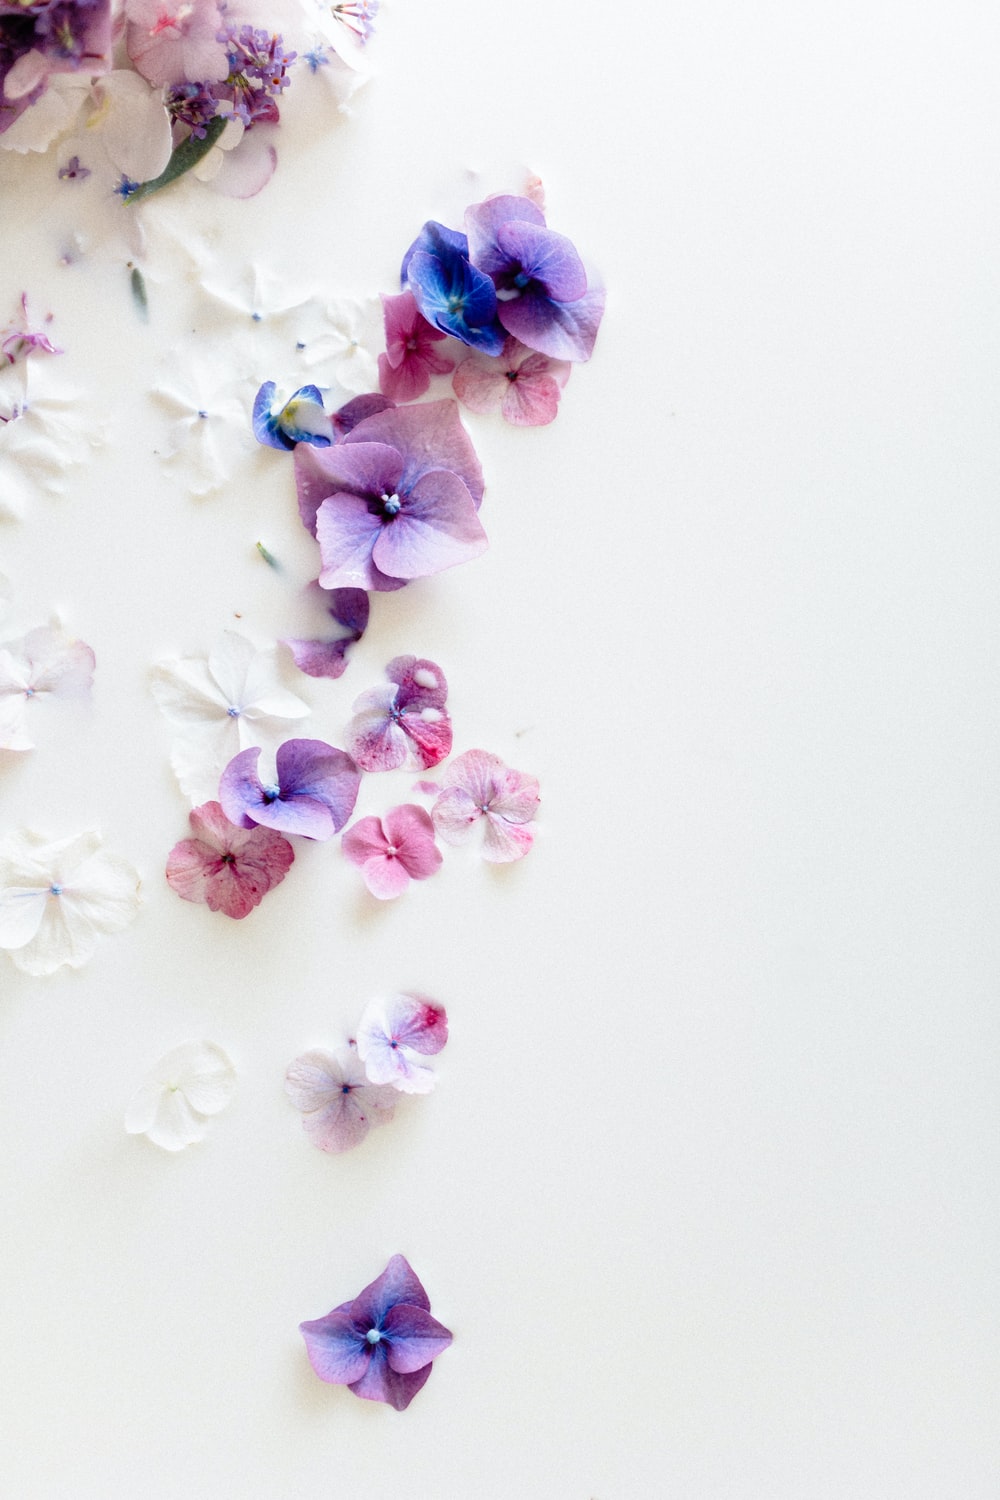 White And Purple Flower Petals Photo Image